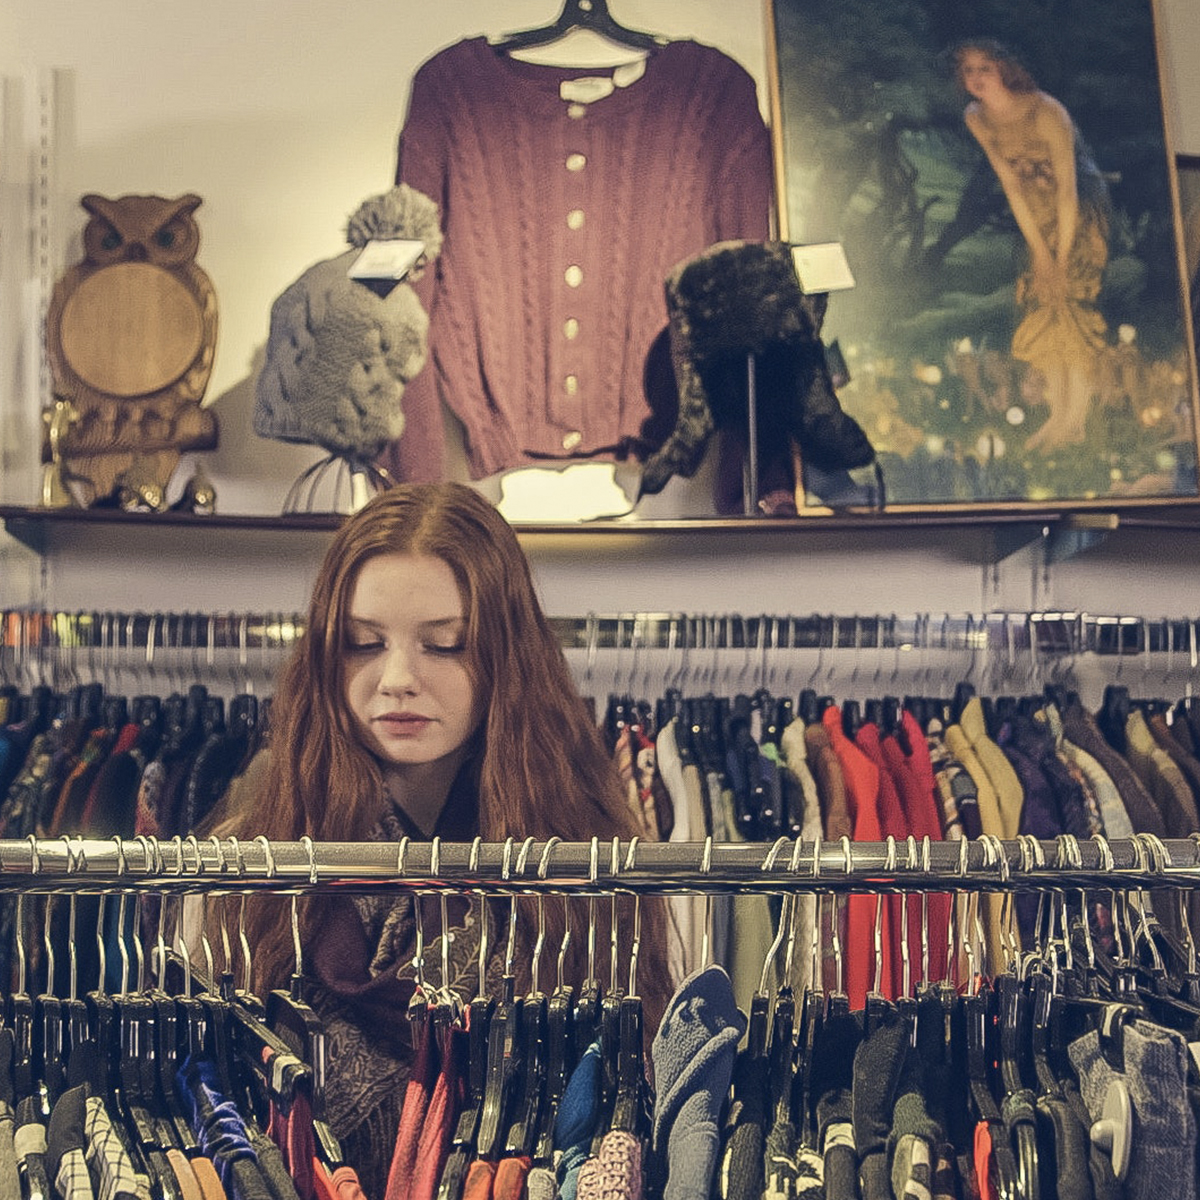 a woman looking at a rack of clothes.